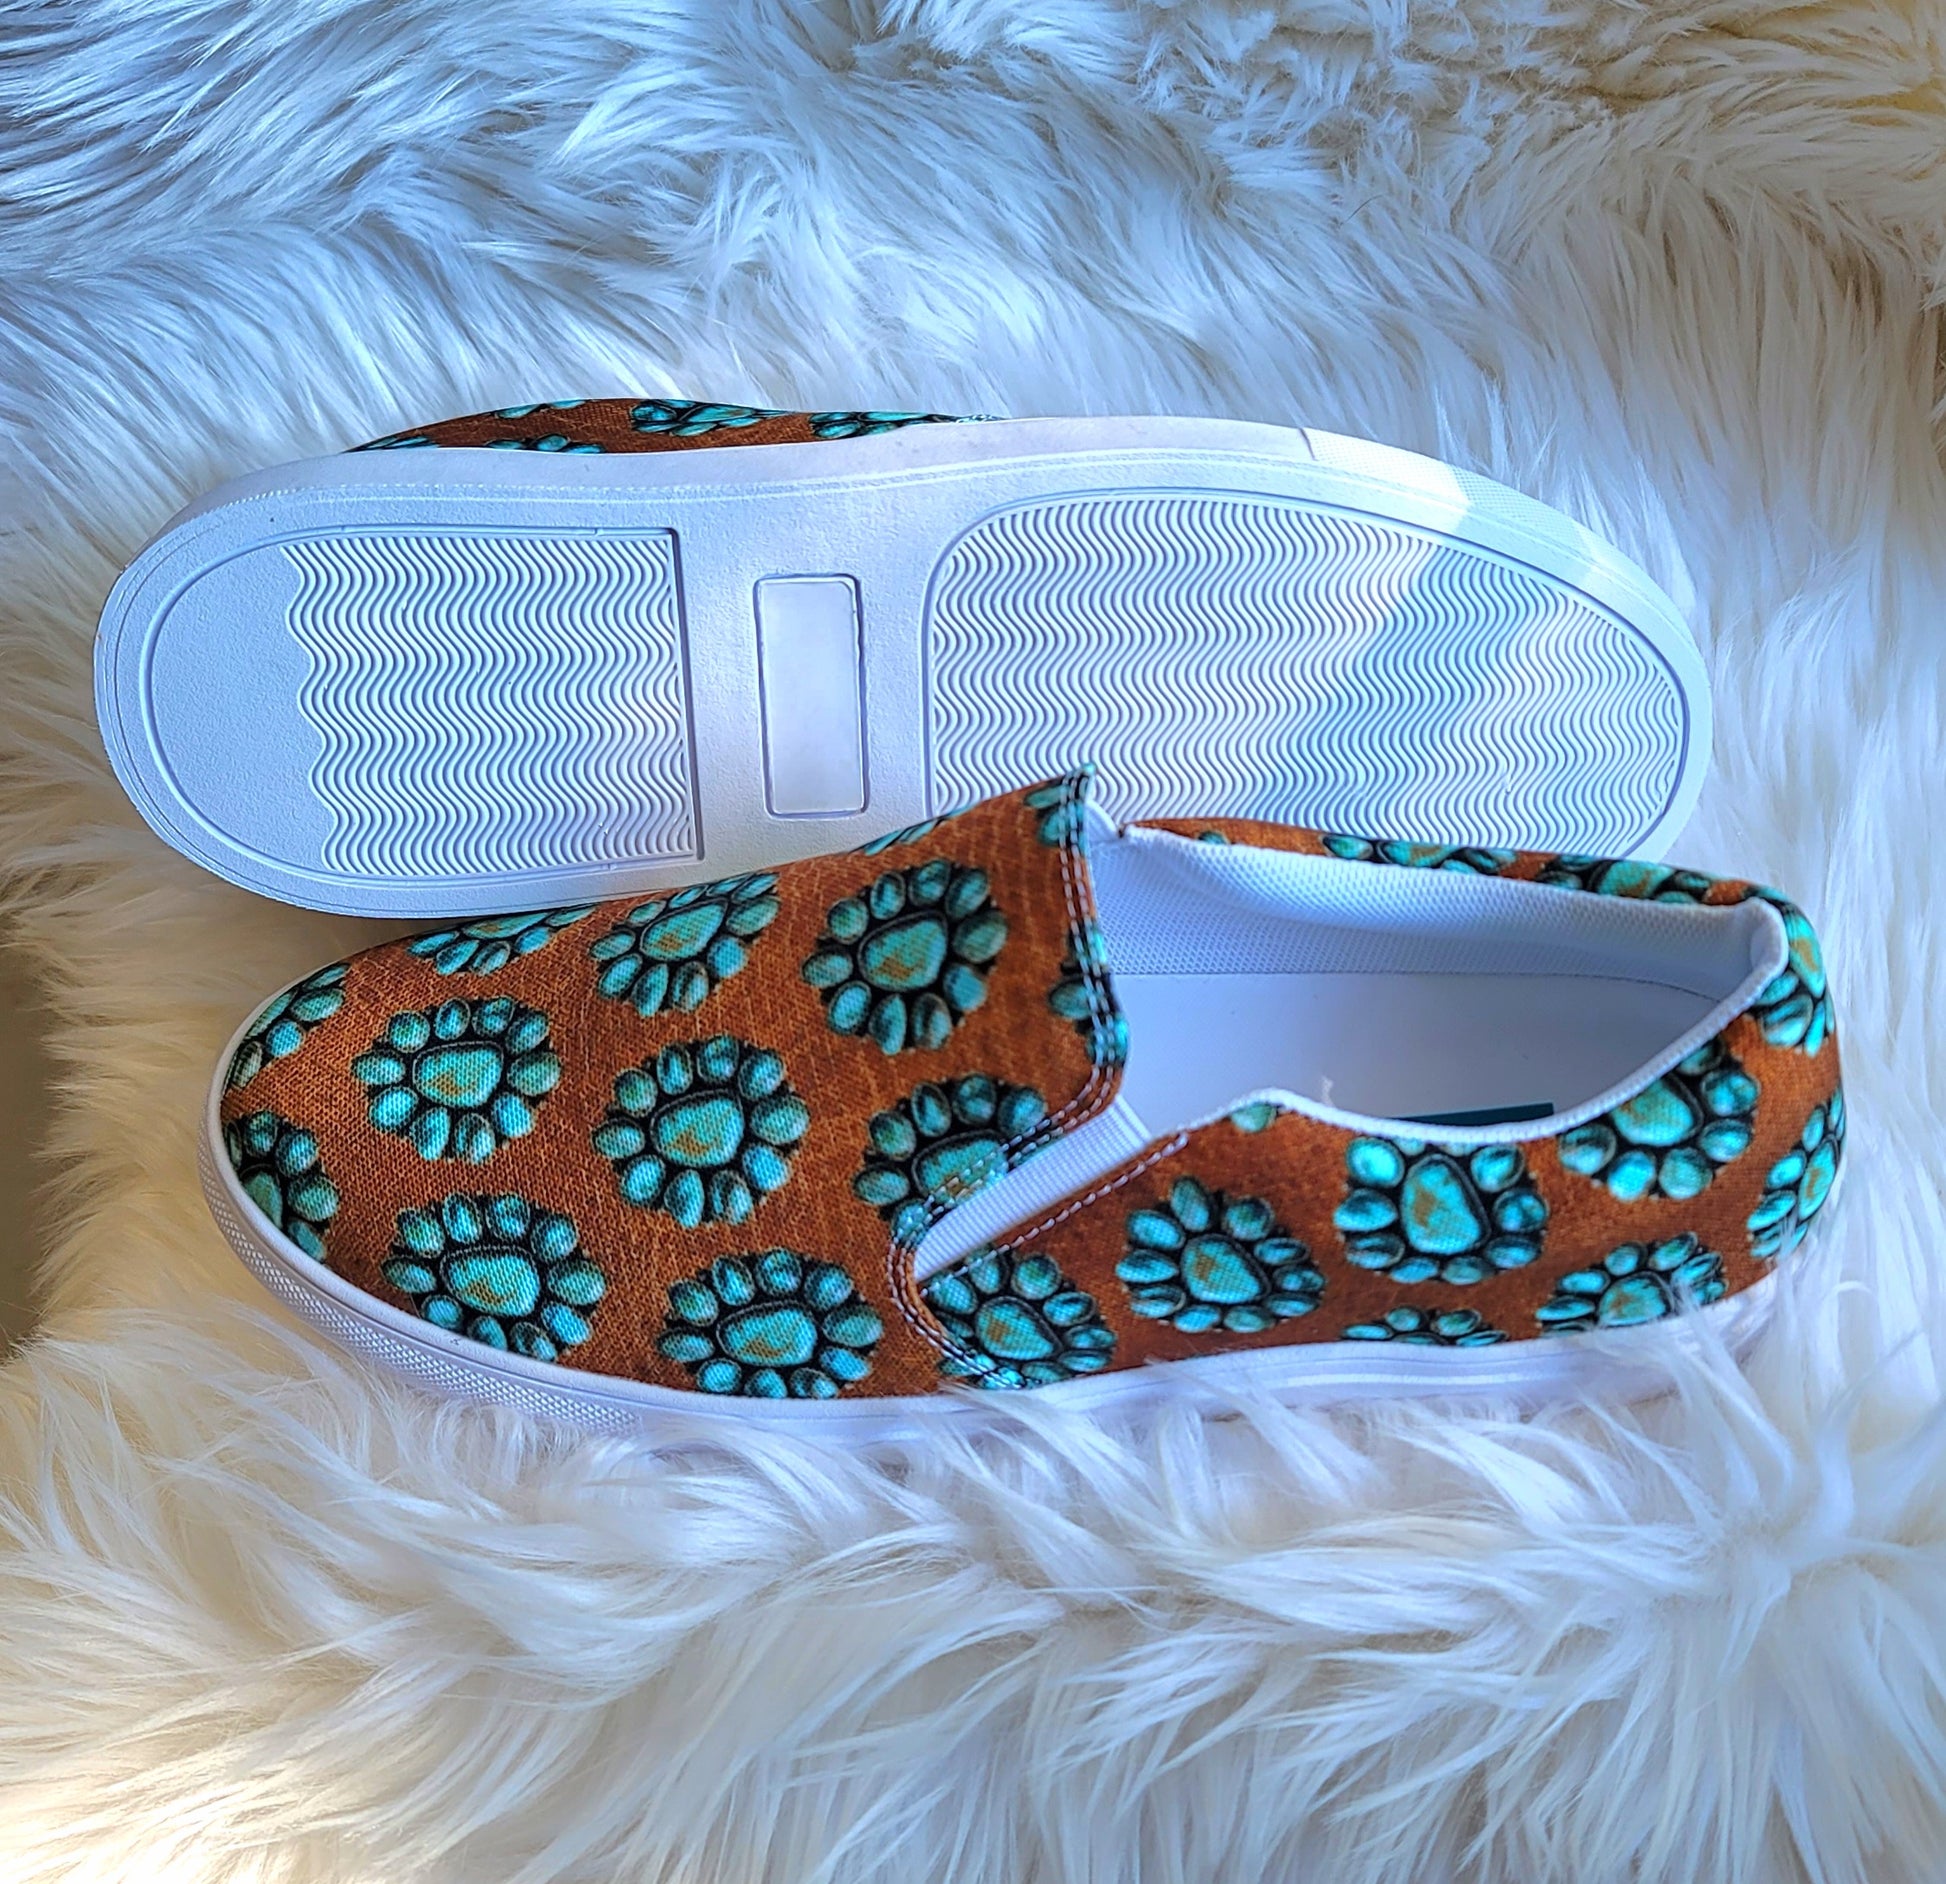 Turquoise Concho Women’s slip-on canvas shoes - concho, conchos, shoe, shoes, slip on shoes, slipon, turquoise, turquoise jewelry -  - Baha Ranch Western Wear